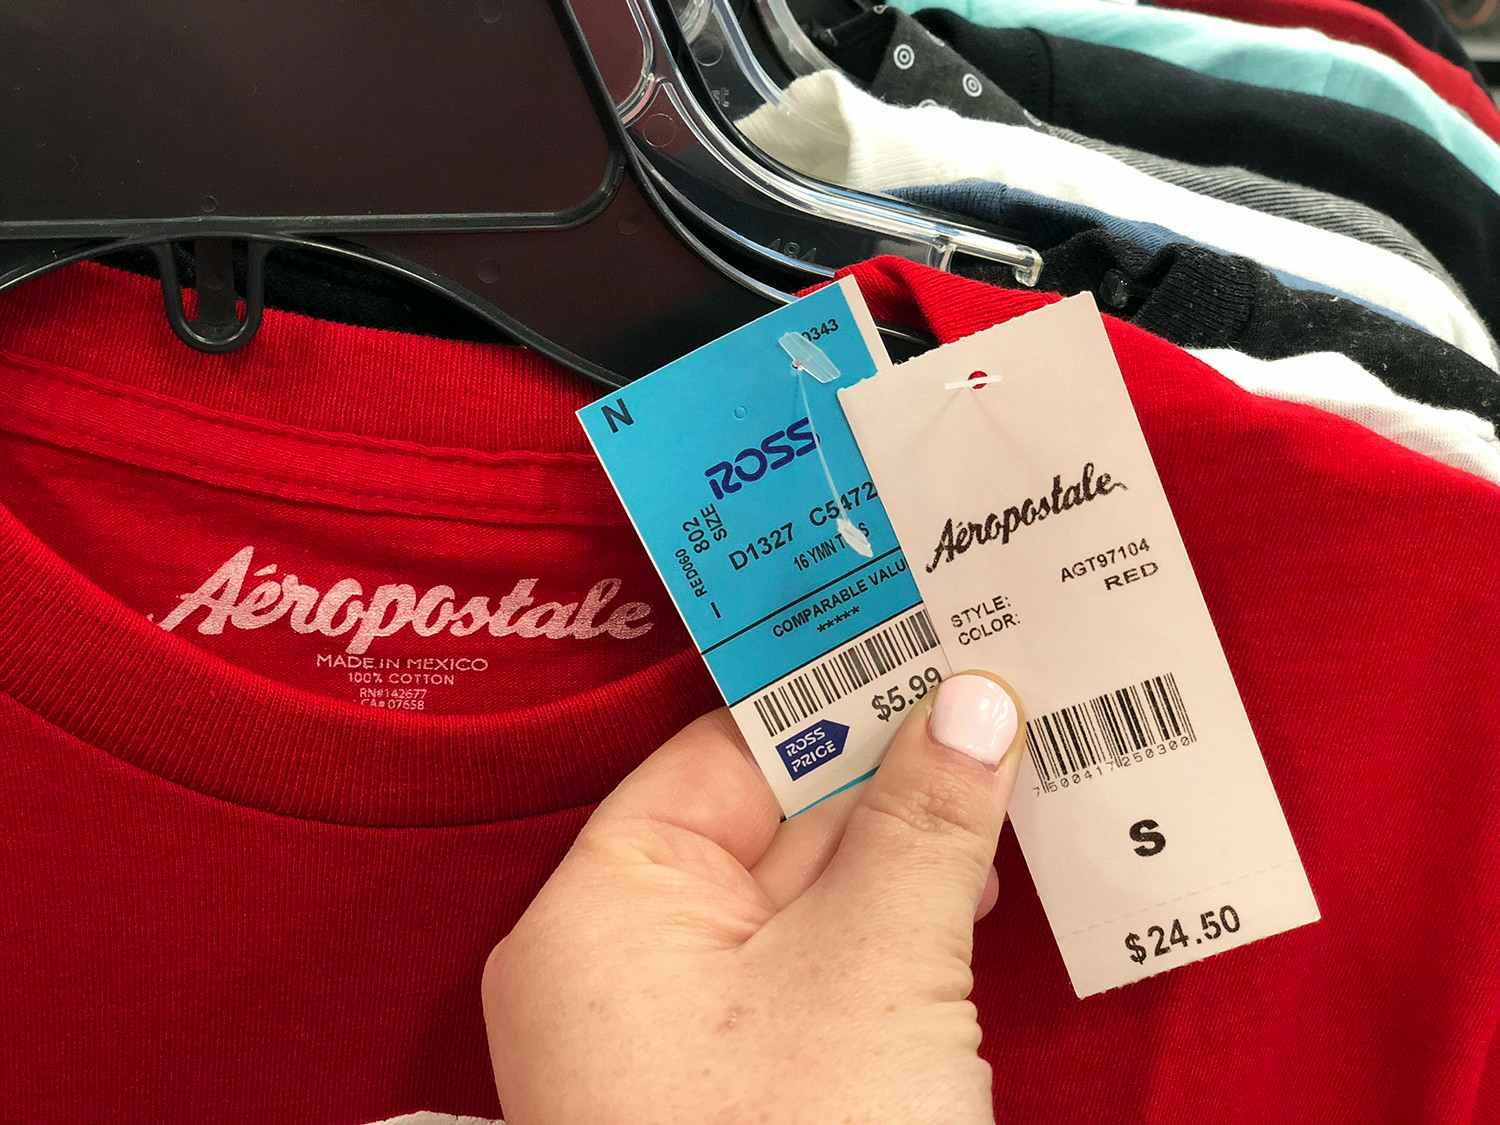 Aeropostale Tees even cheaper than sale pricing at Ross.